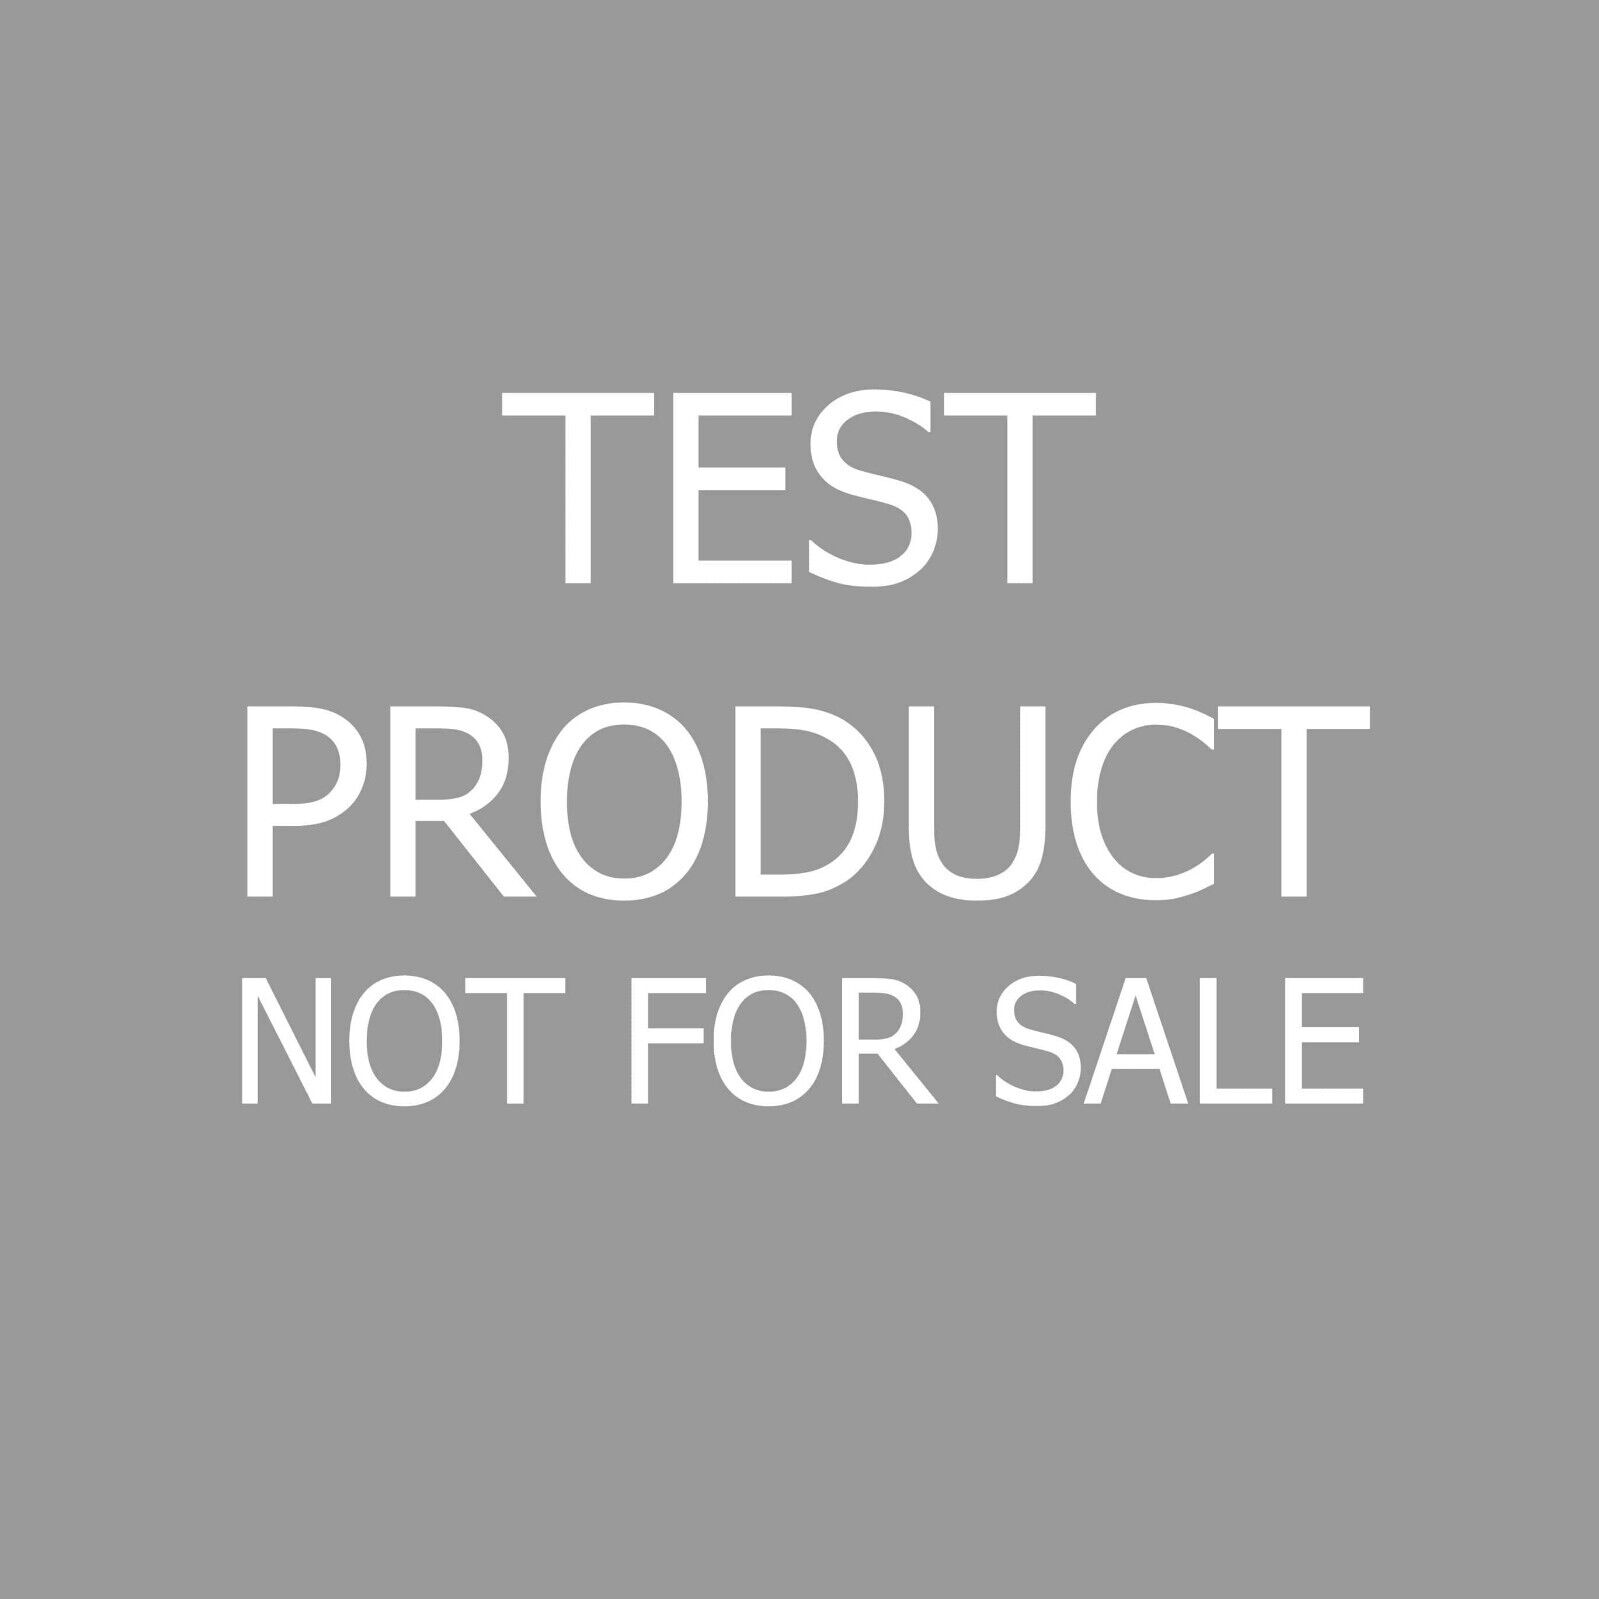 Test Product - Not for Sale 1089